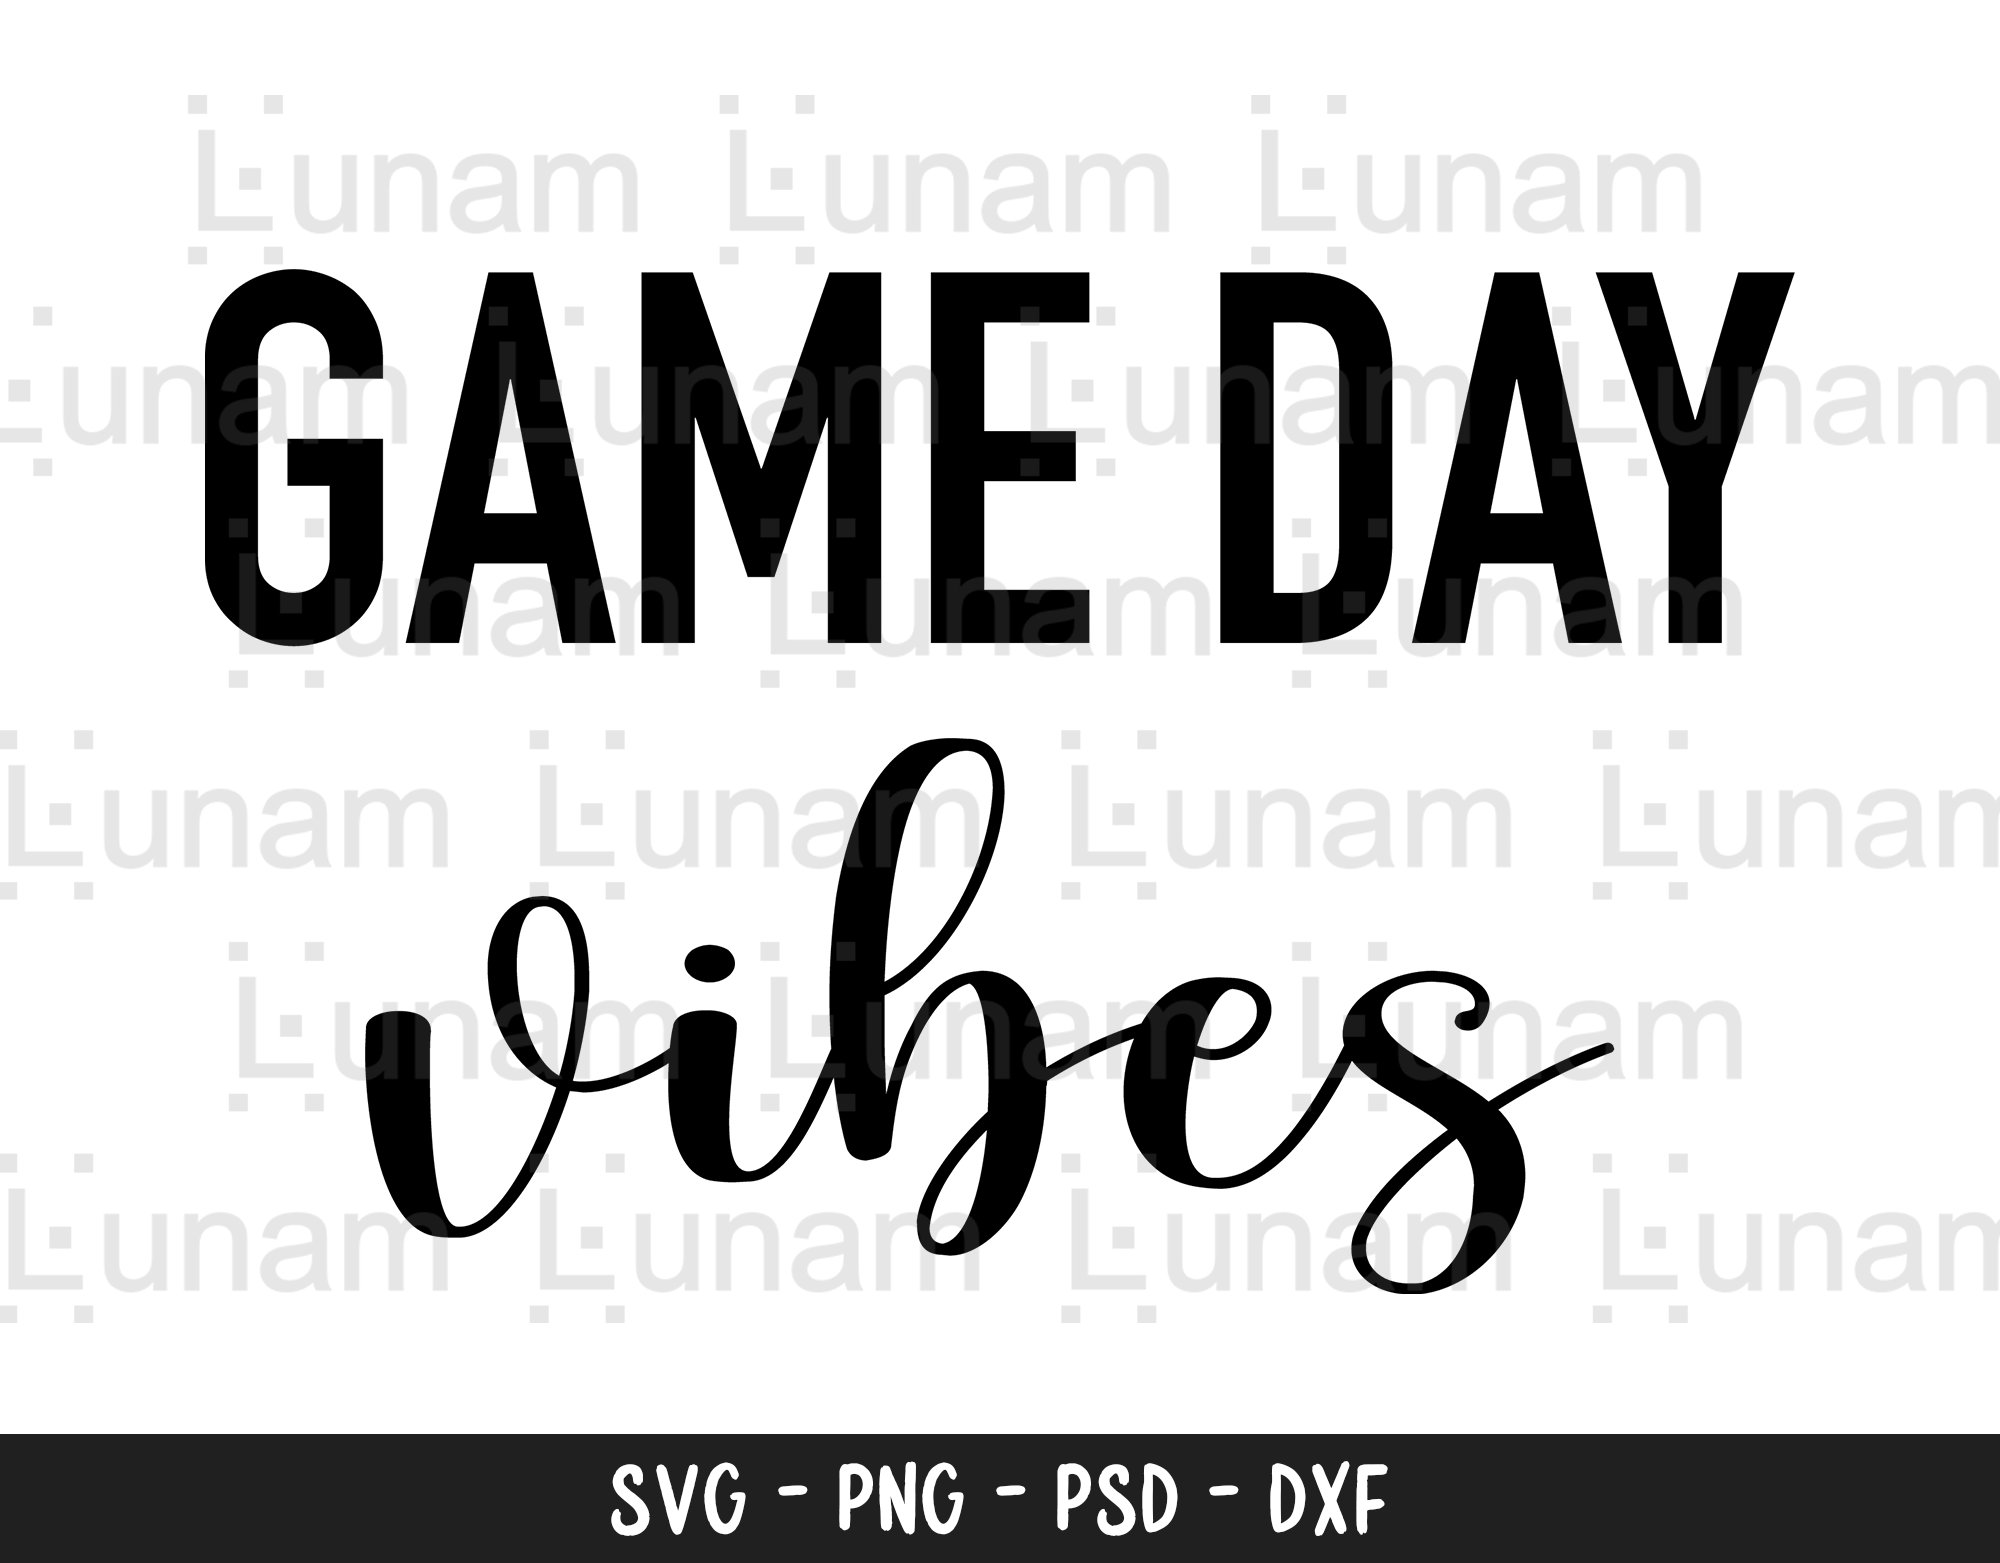 Baseball Shirt Svg Eps Football Shirt Svg Football Mama Png Game Day Vibes Svg Dxf Sports Shirt Svg It's Game Day Y'all